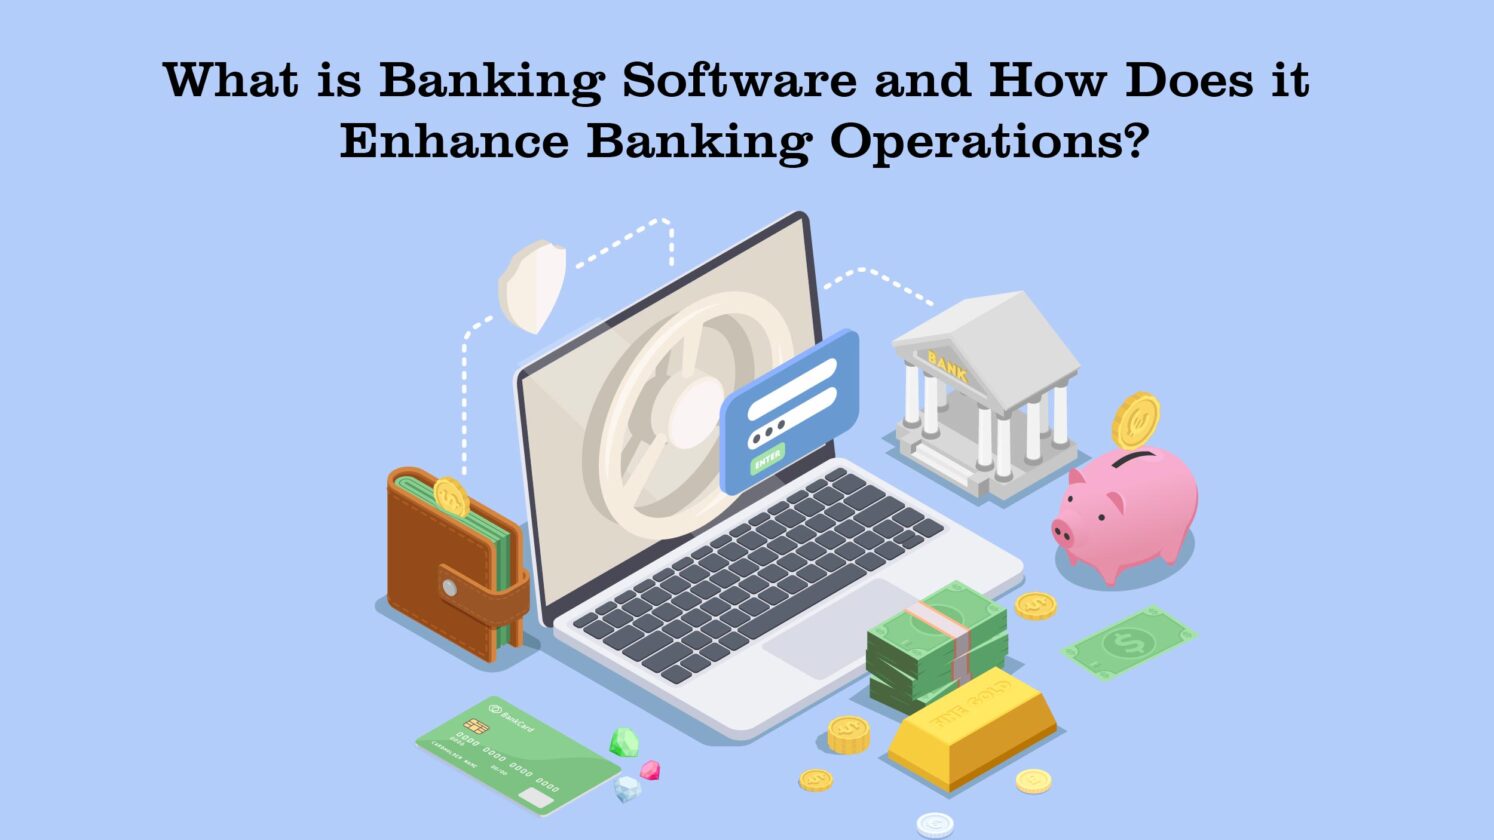 What's Next in Banking Software: Trends and Top Solutions for 2024